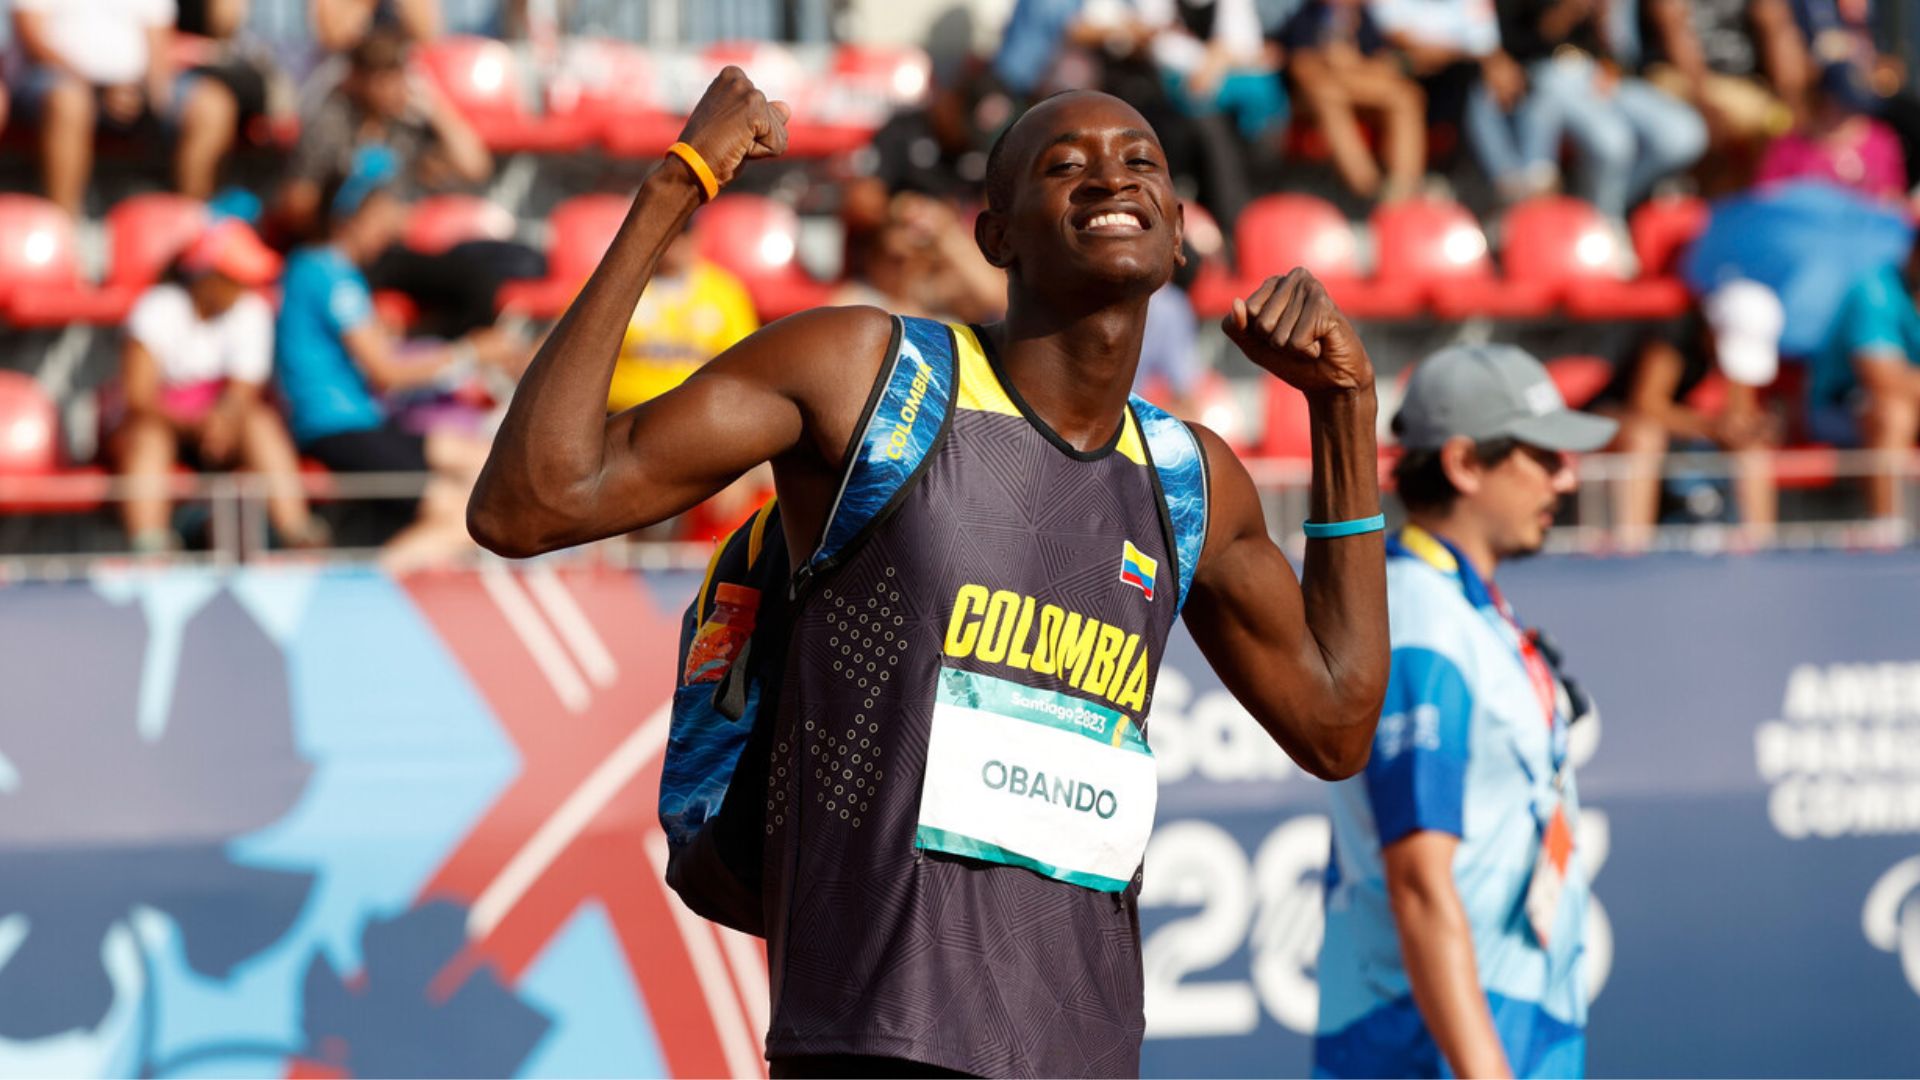 Gold, silver, and a record for Colombia in the long jump